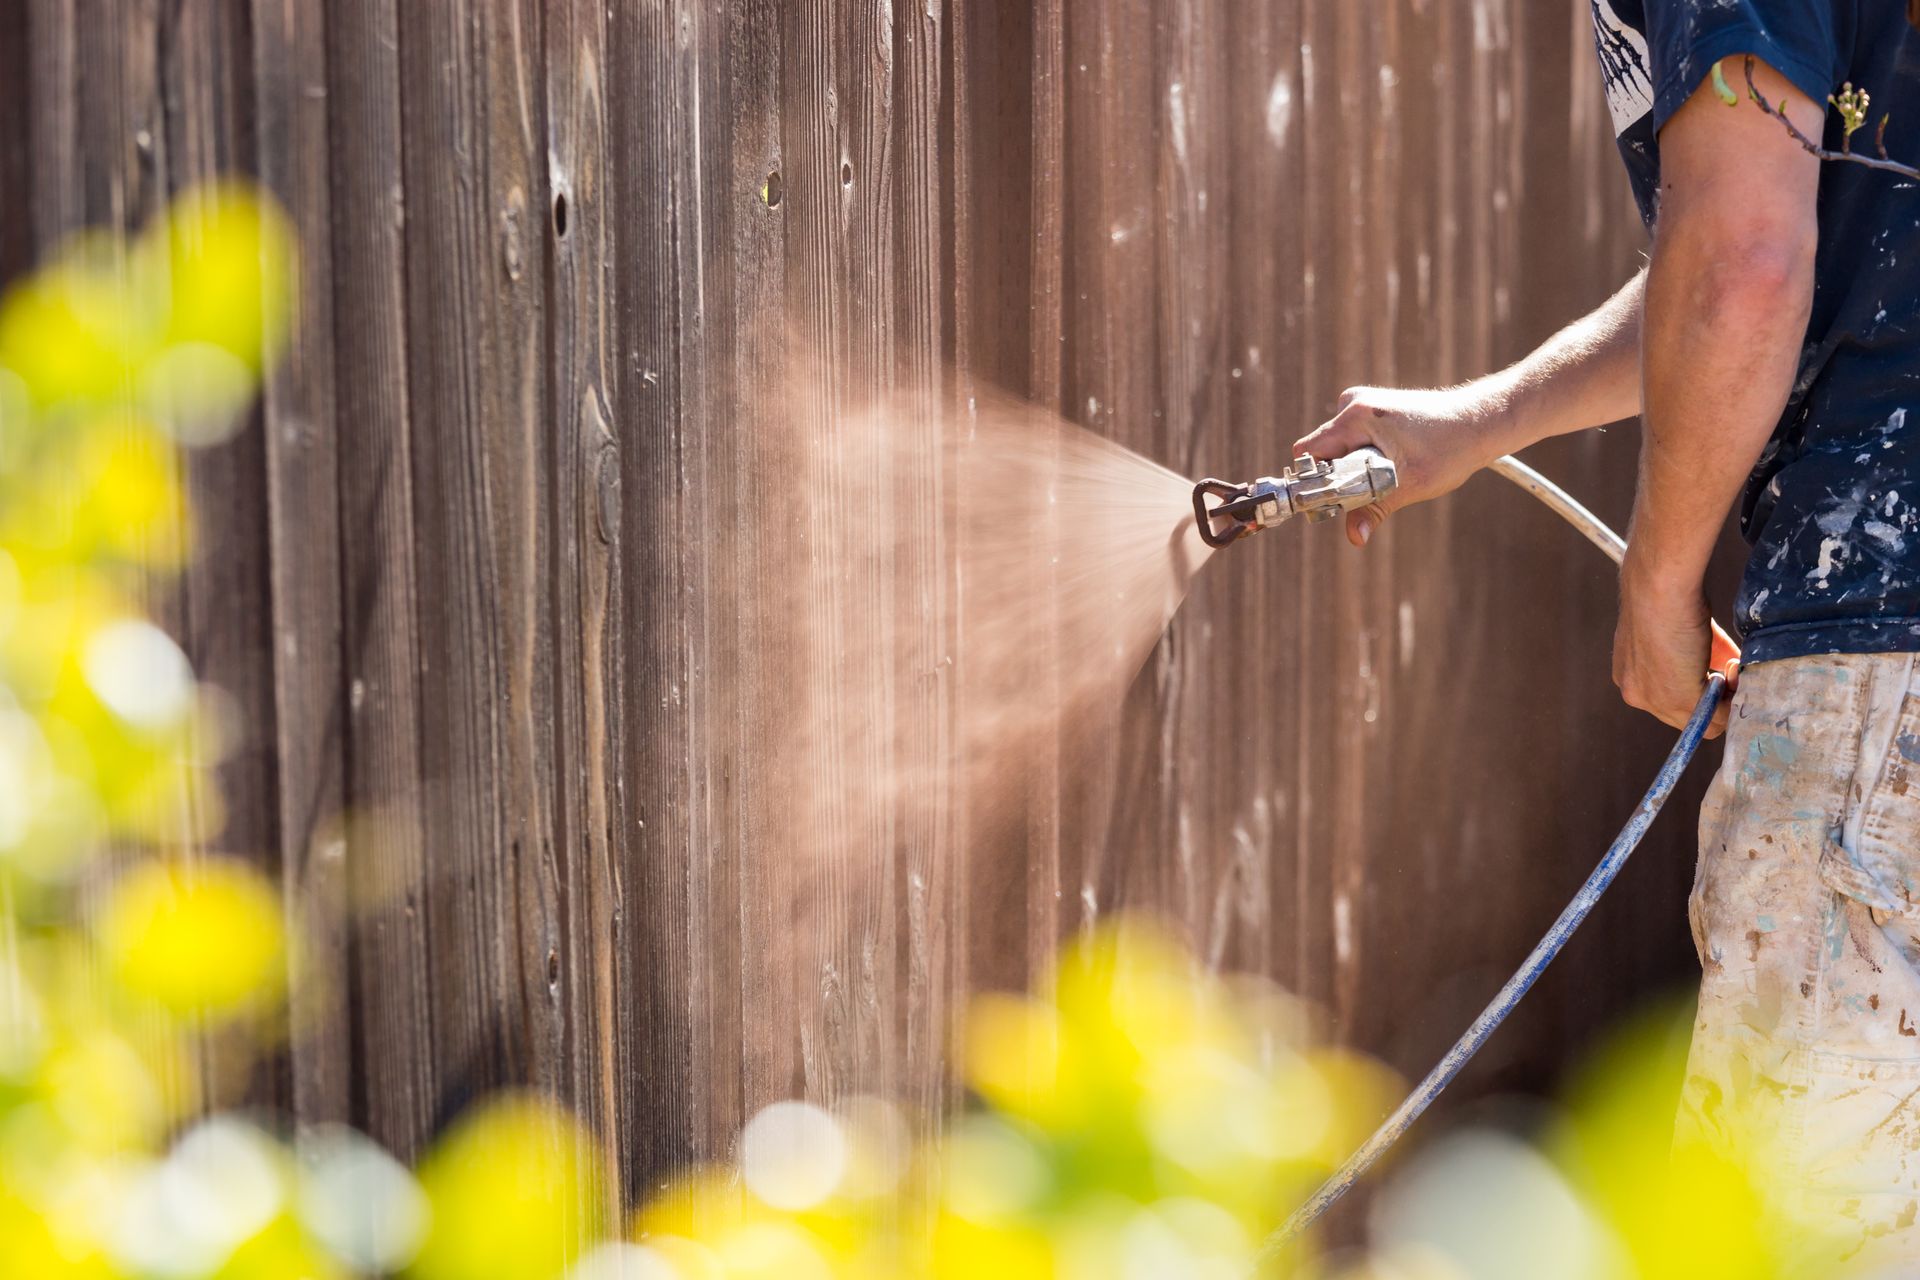 A professional painter skillfully applies wood stain to a house yard fence, using a spray technique for an even and smooth finish.